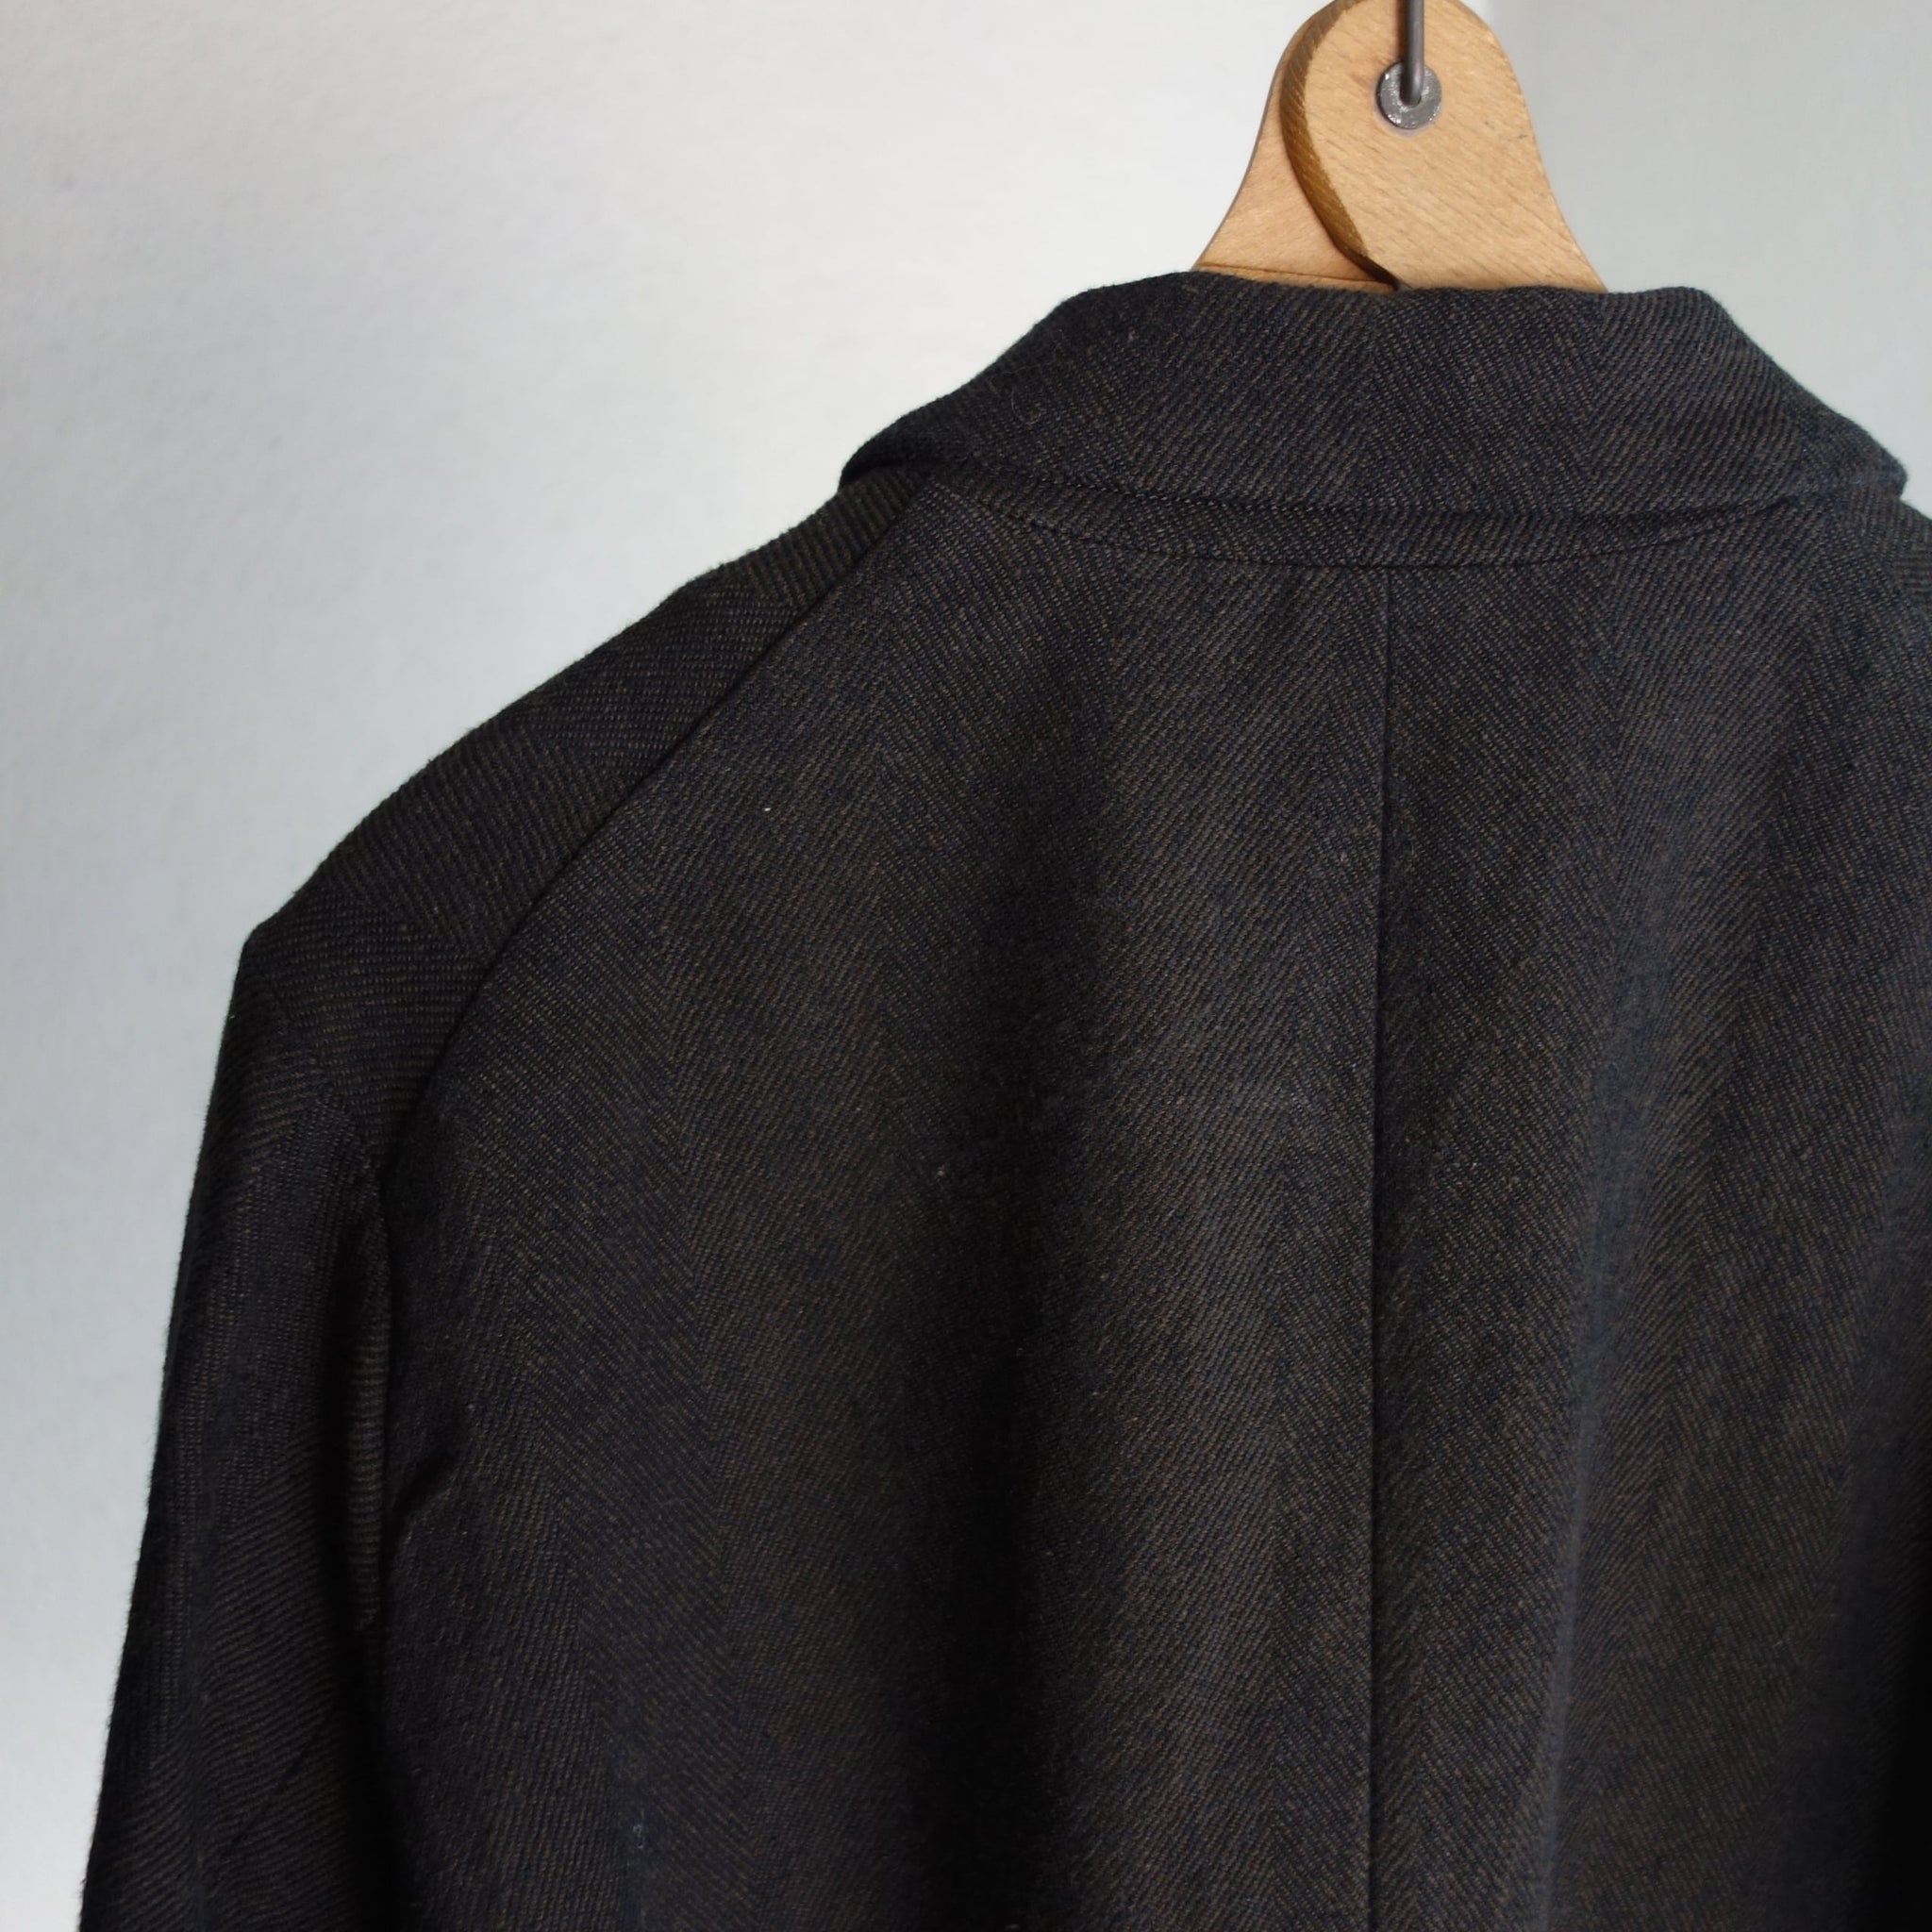 ATELIER GARDENIA classique frenchsackcoat / charcoal（brown x black）20% off